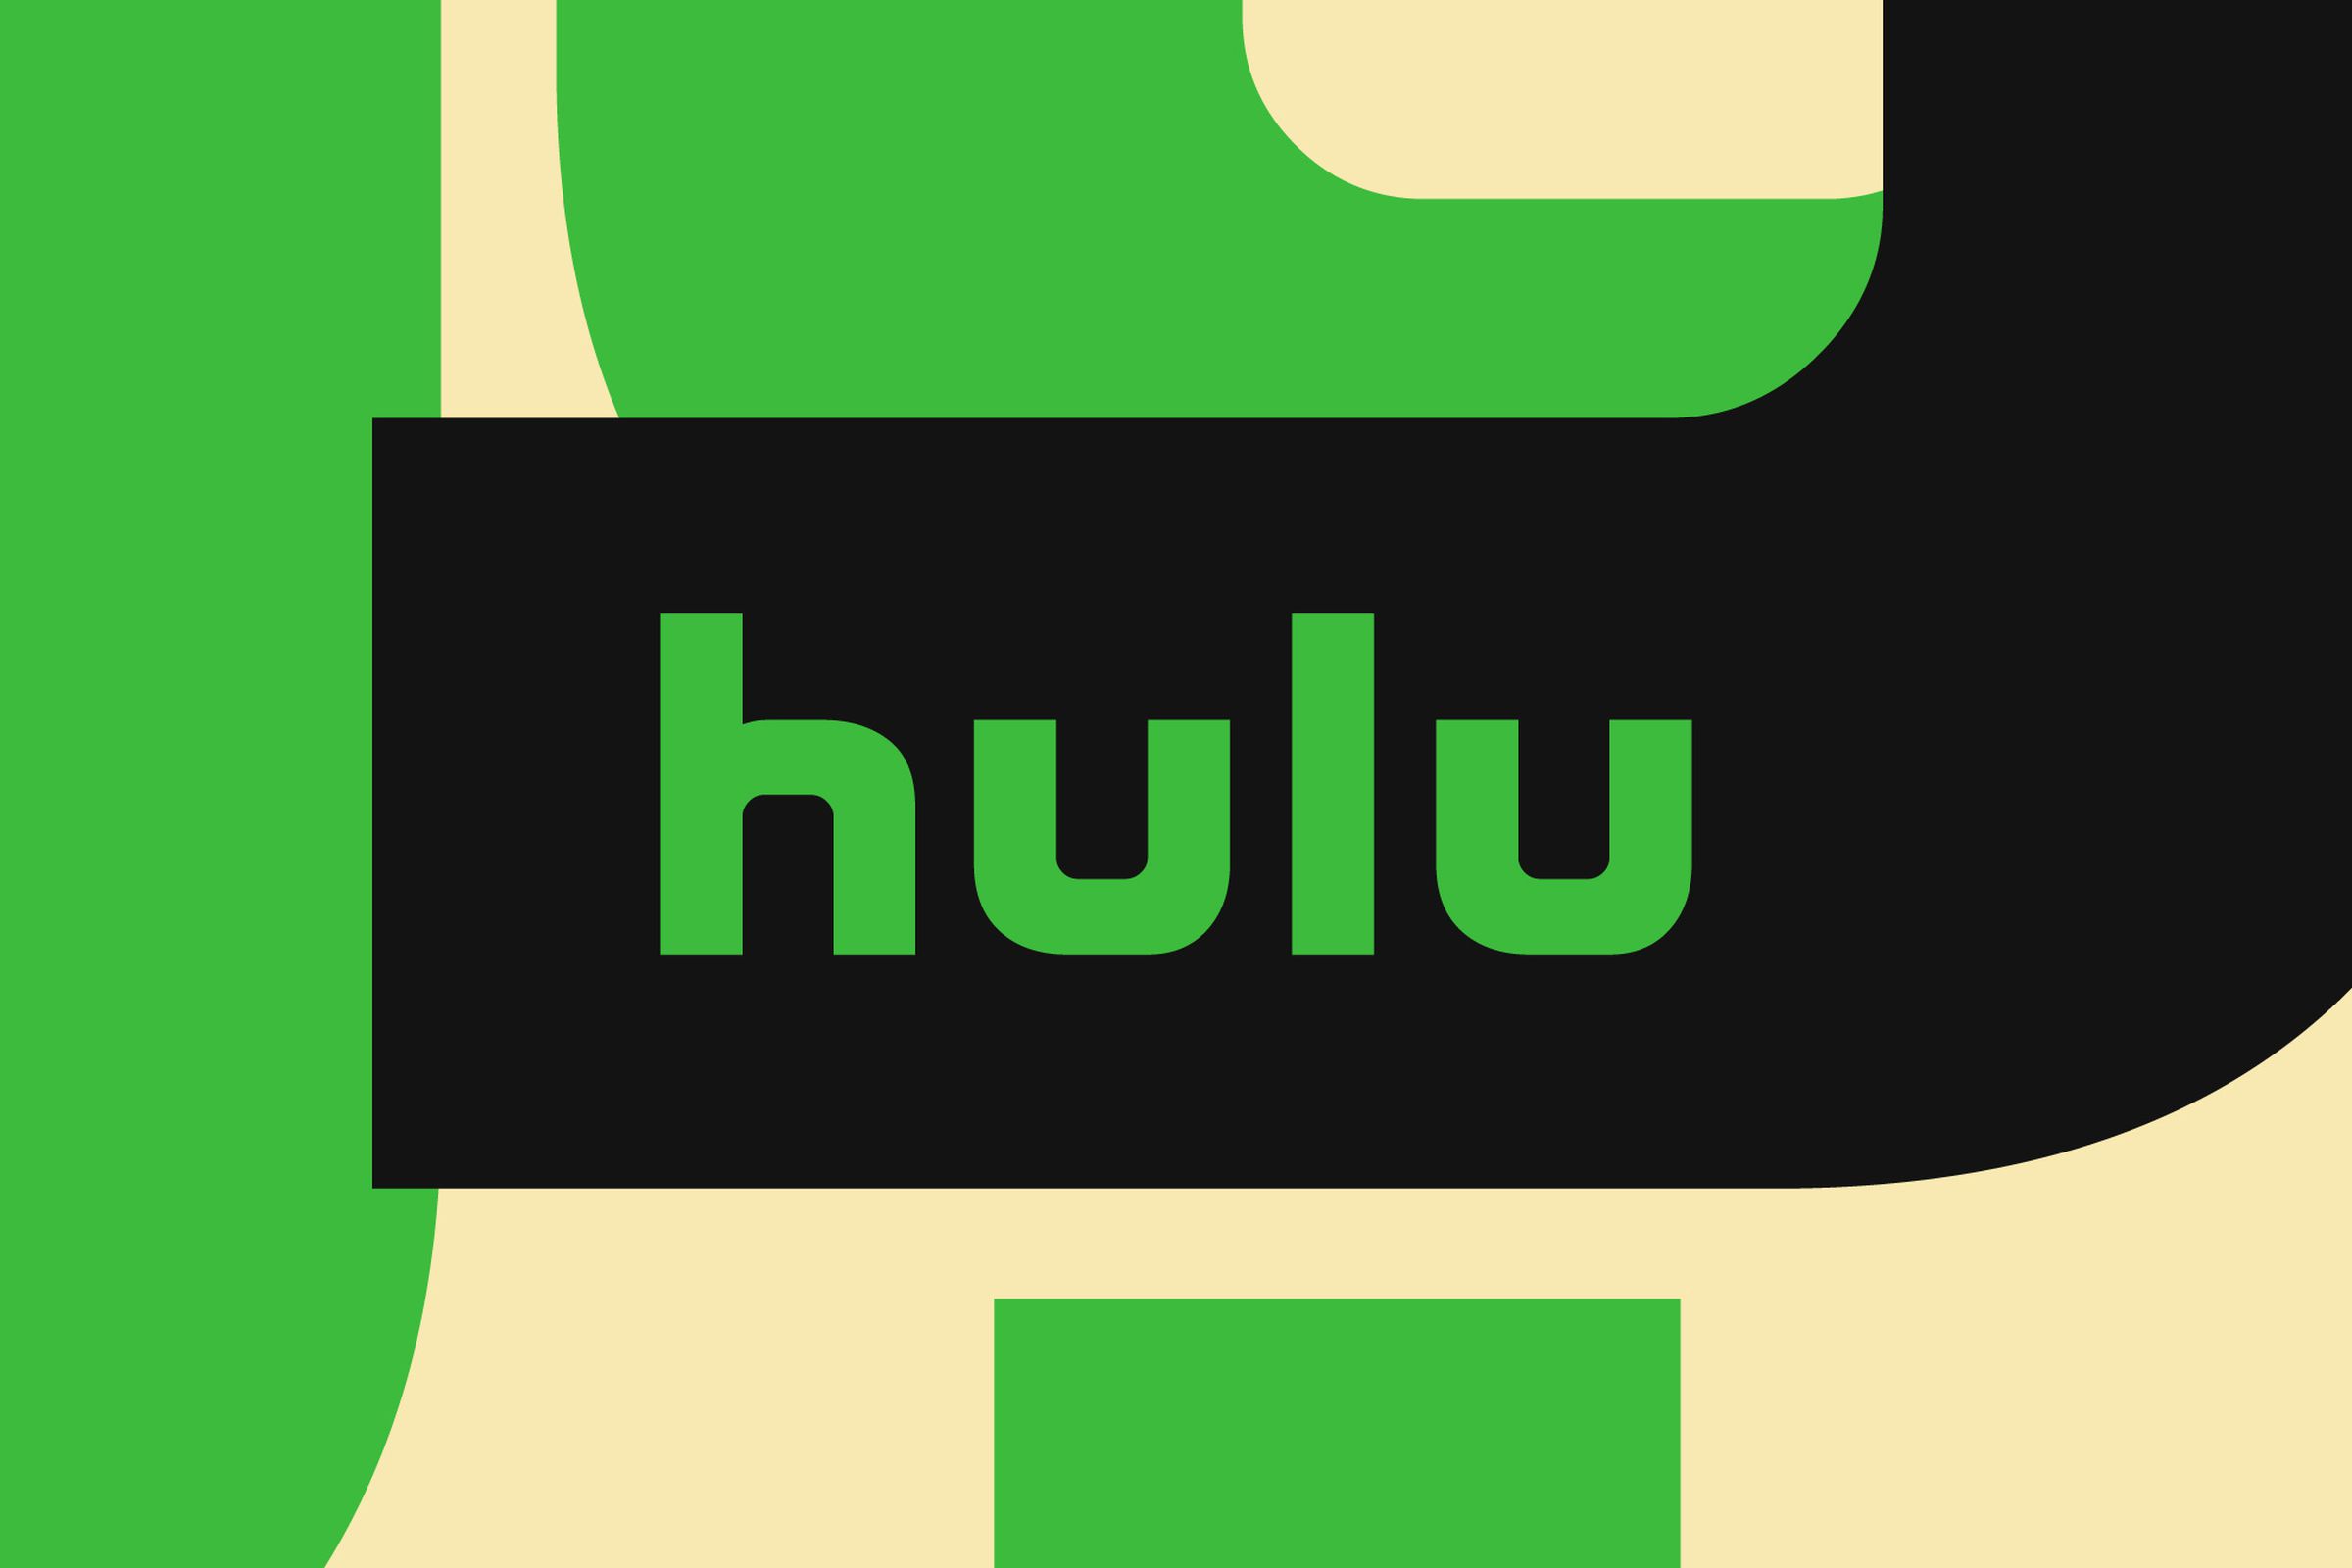 An image showing Hulu’s logo on an abstract background